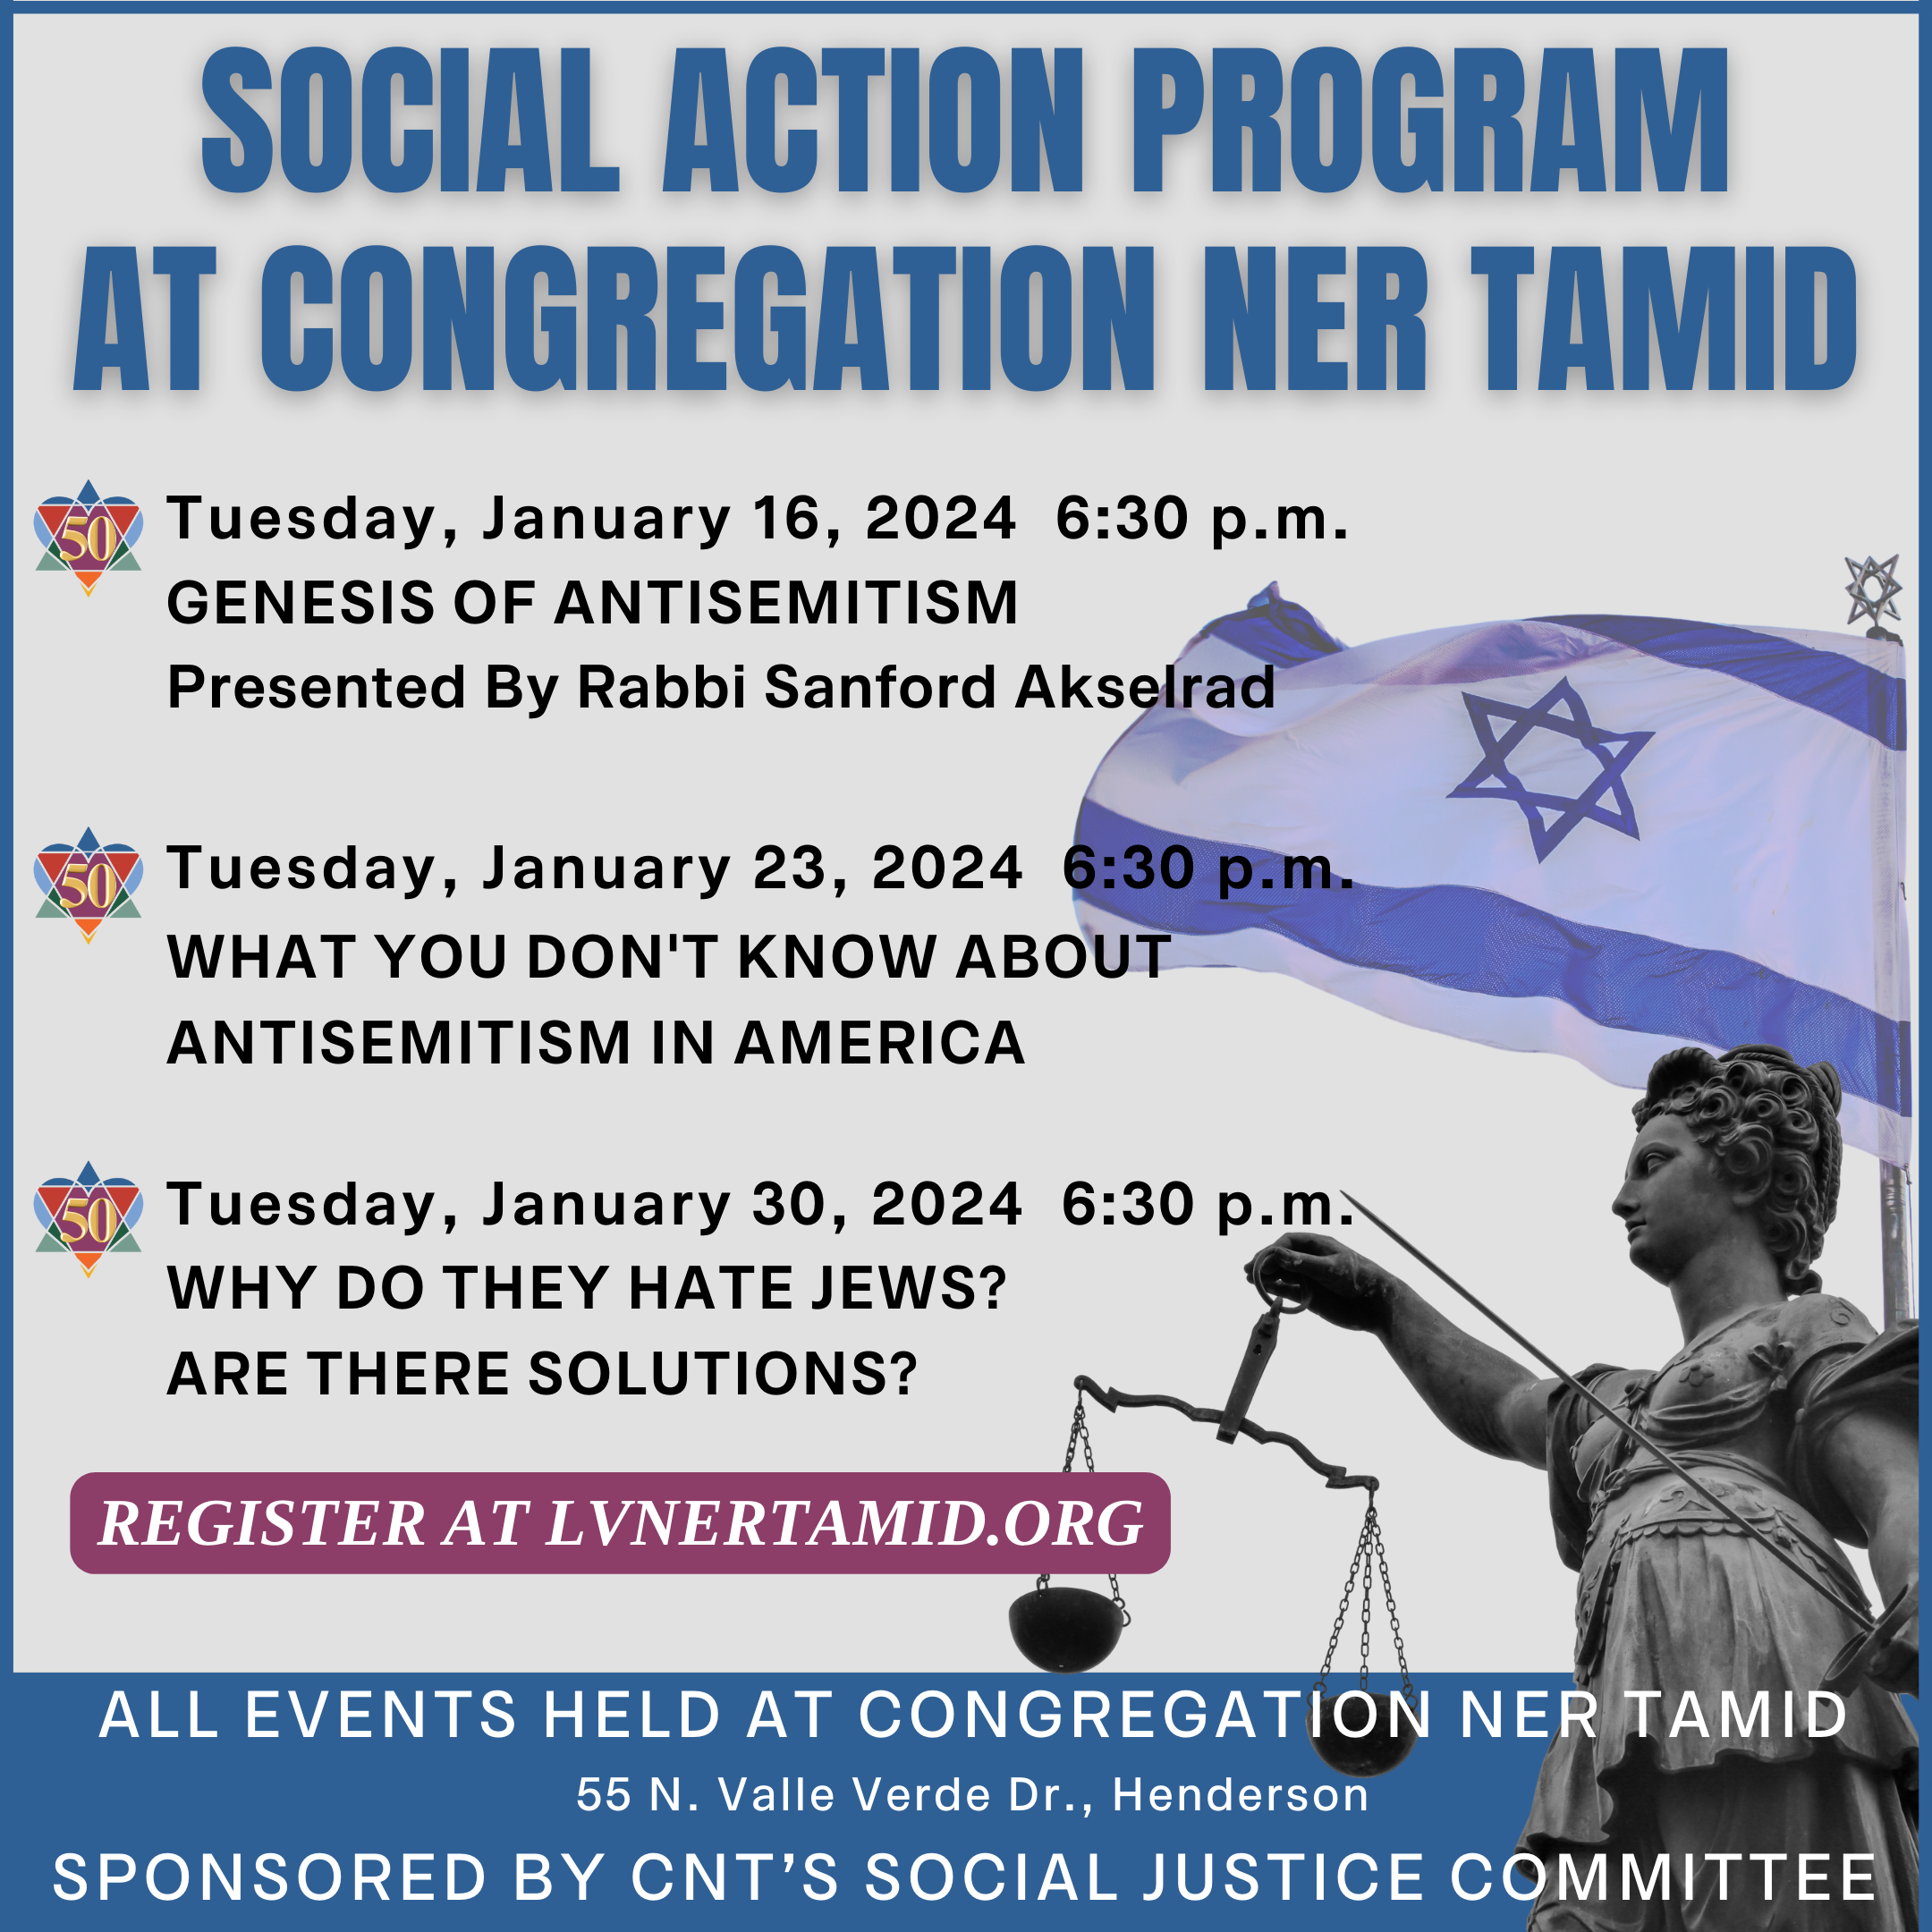 CNT'S SOCIAL ACTION COMMITTEE PRESENTS 'GENESIS OF ANTISEMITISM' PRESENTED BY RABBI AKSELRAD